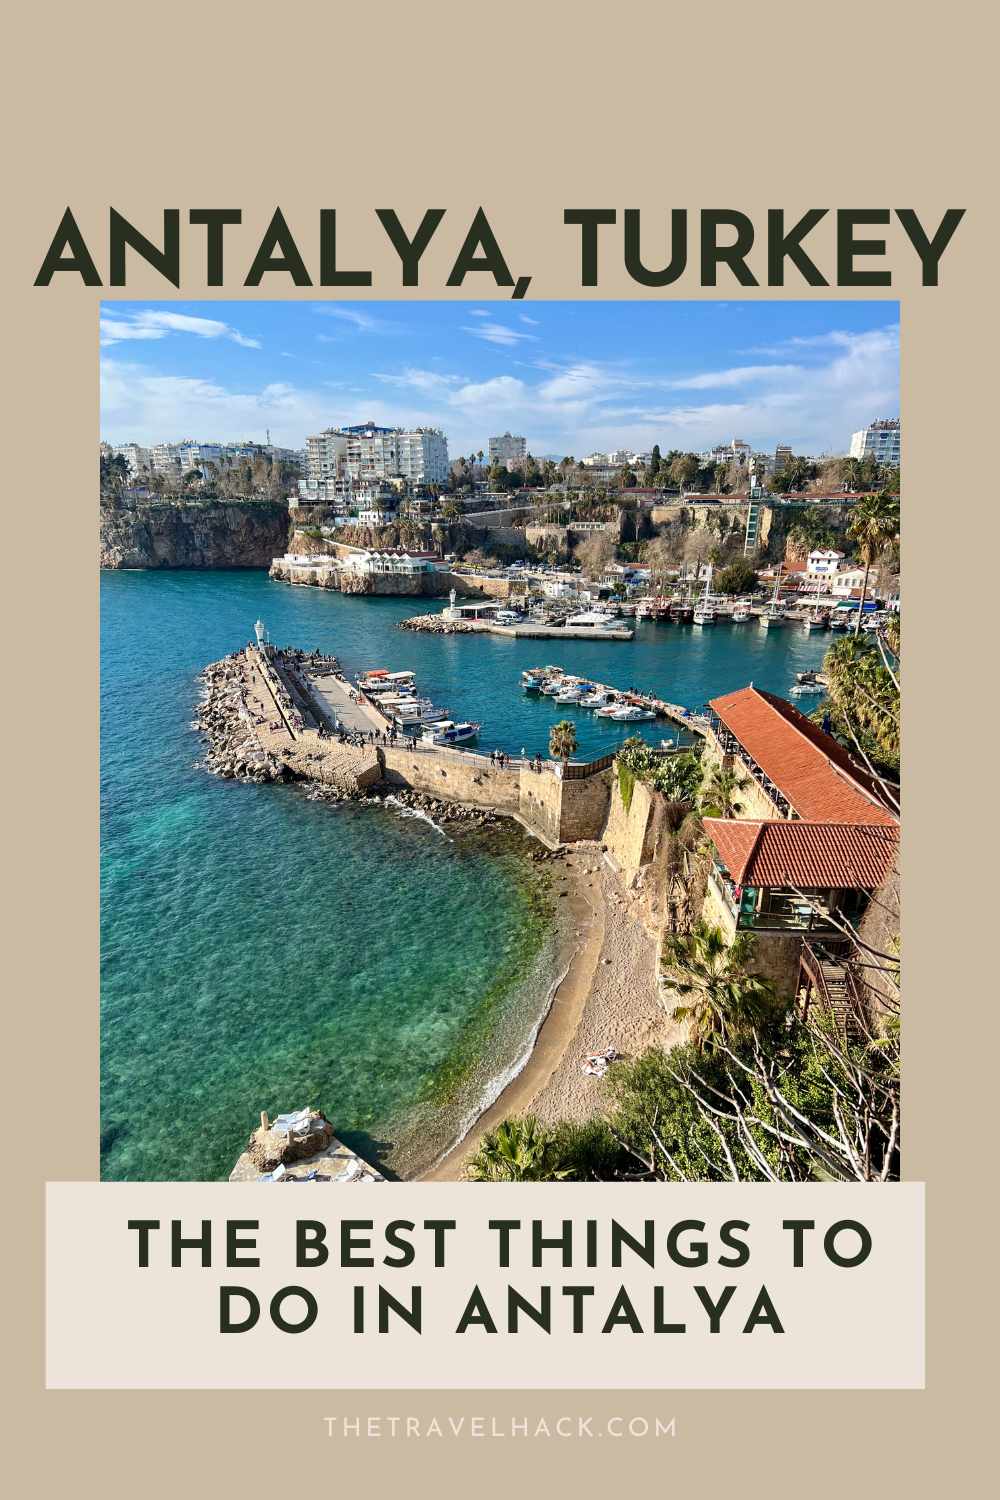 The best Things to do in Antalya